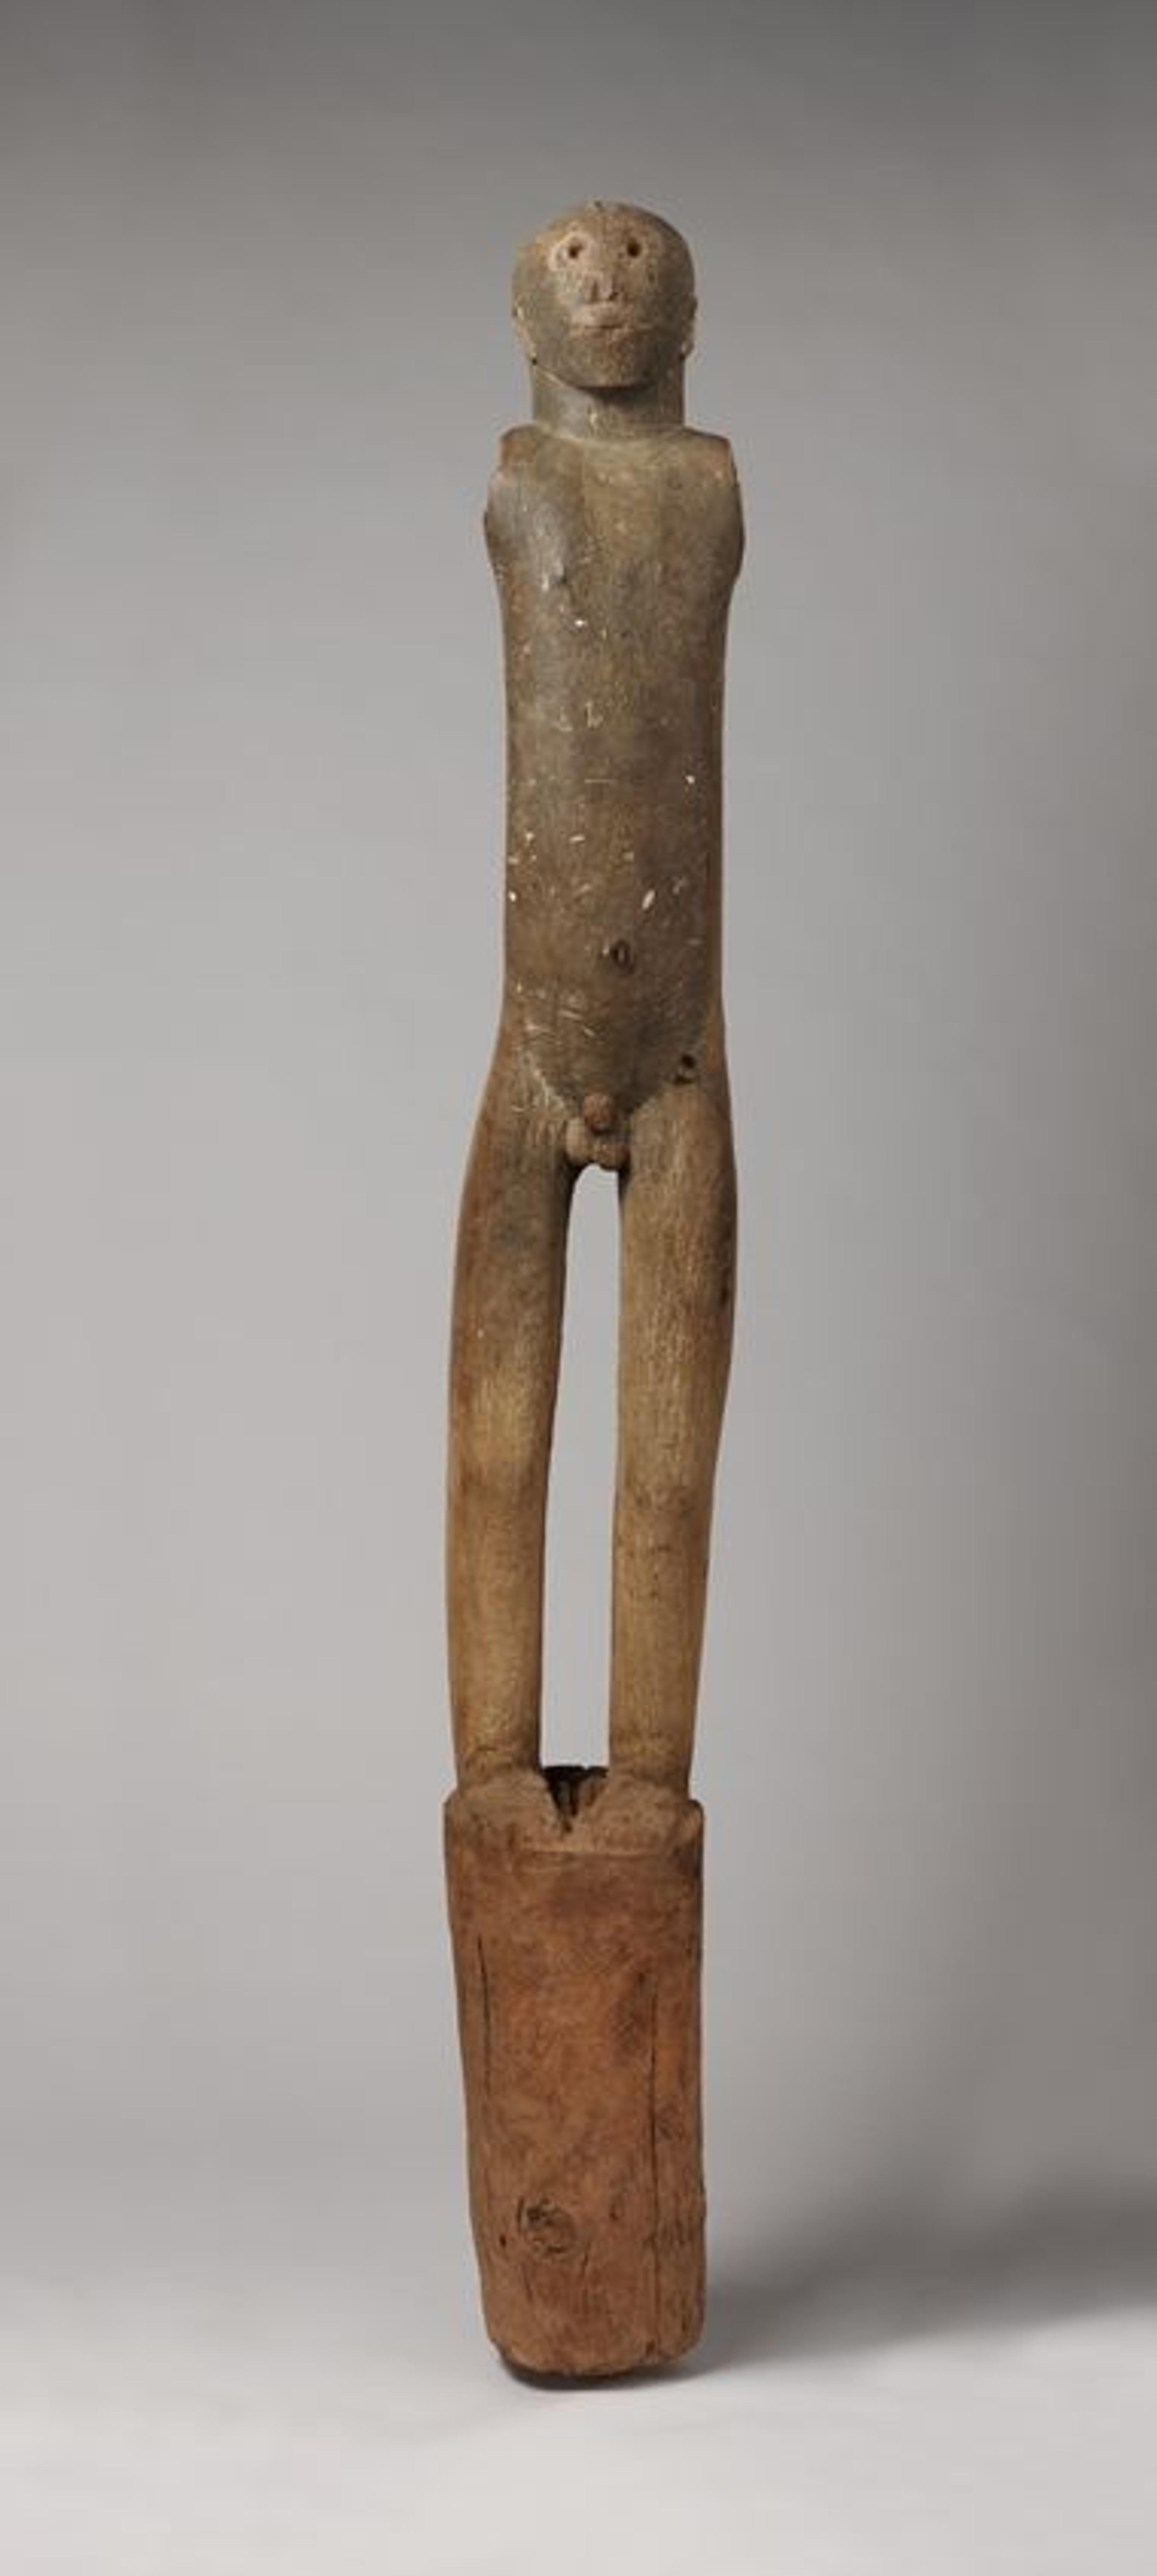 A 19th-century commemorative post from the South Sudan made by the Bongo peoples